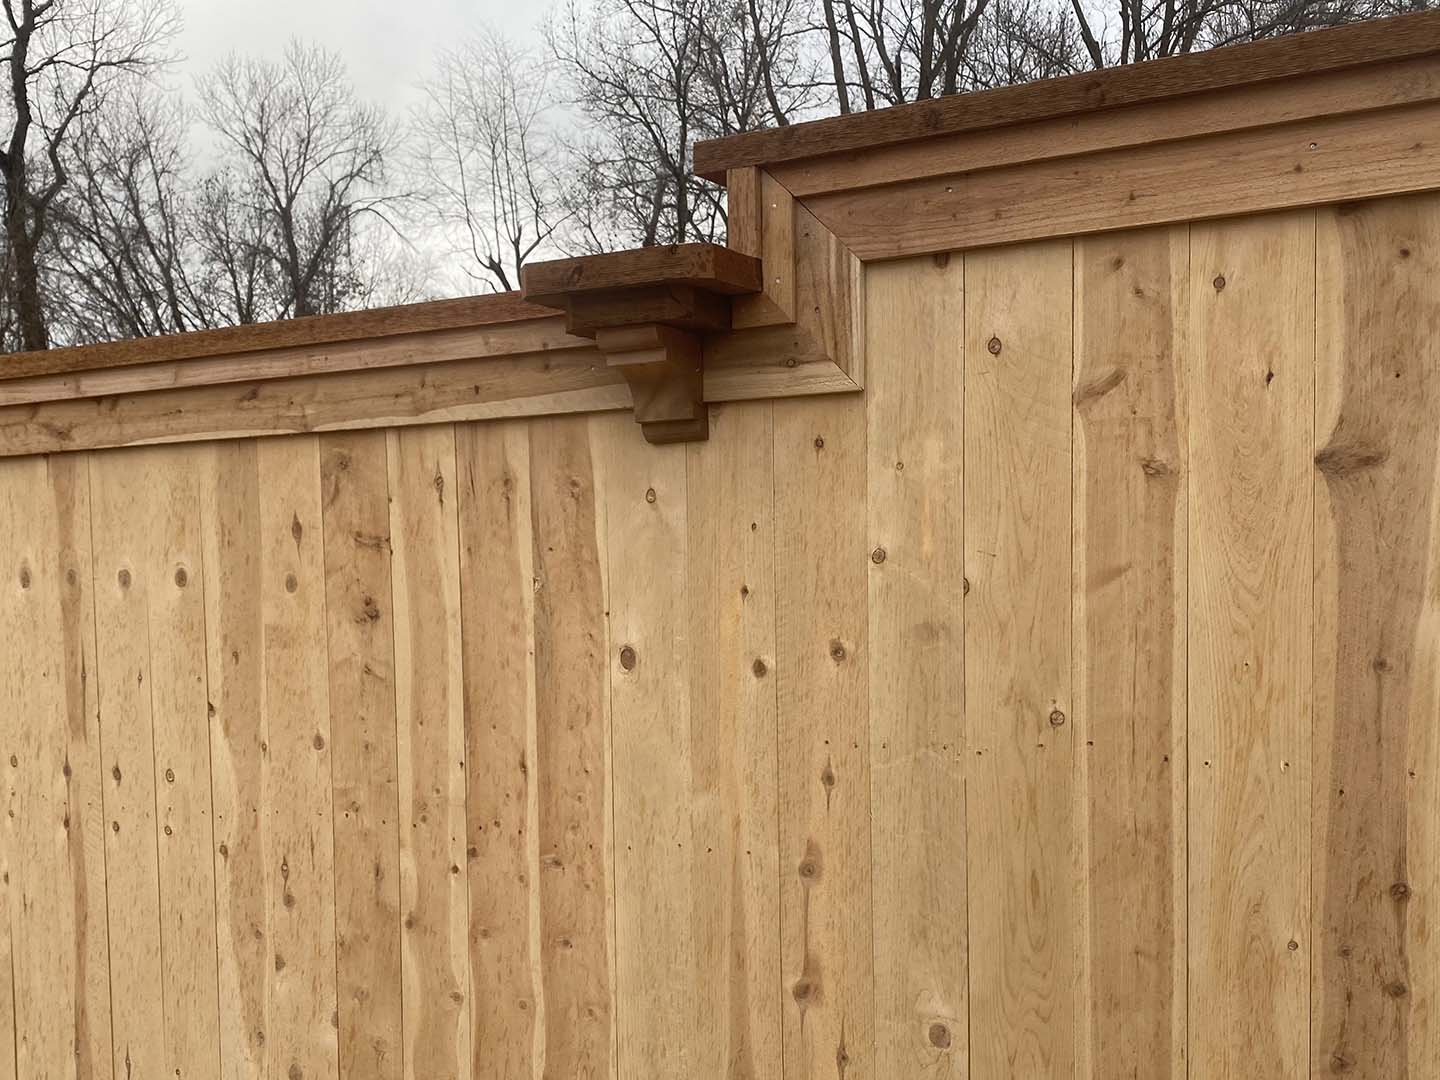 Custom Fence Project in West Tennessee